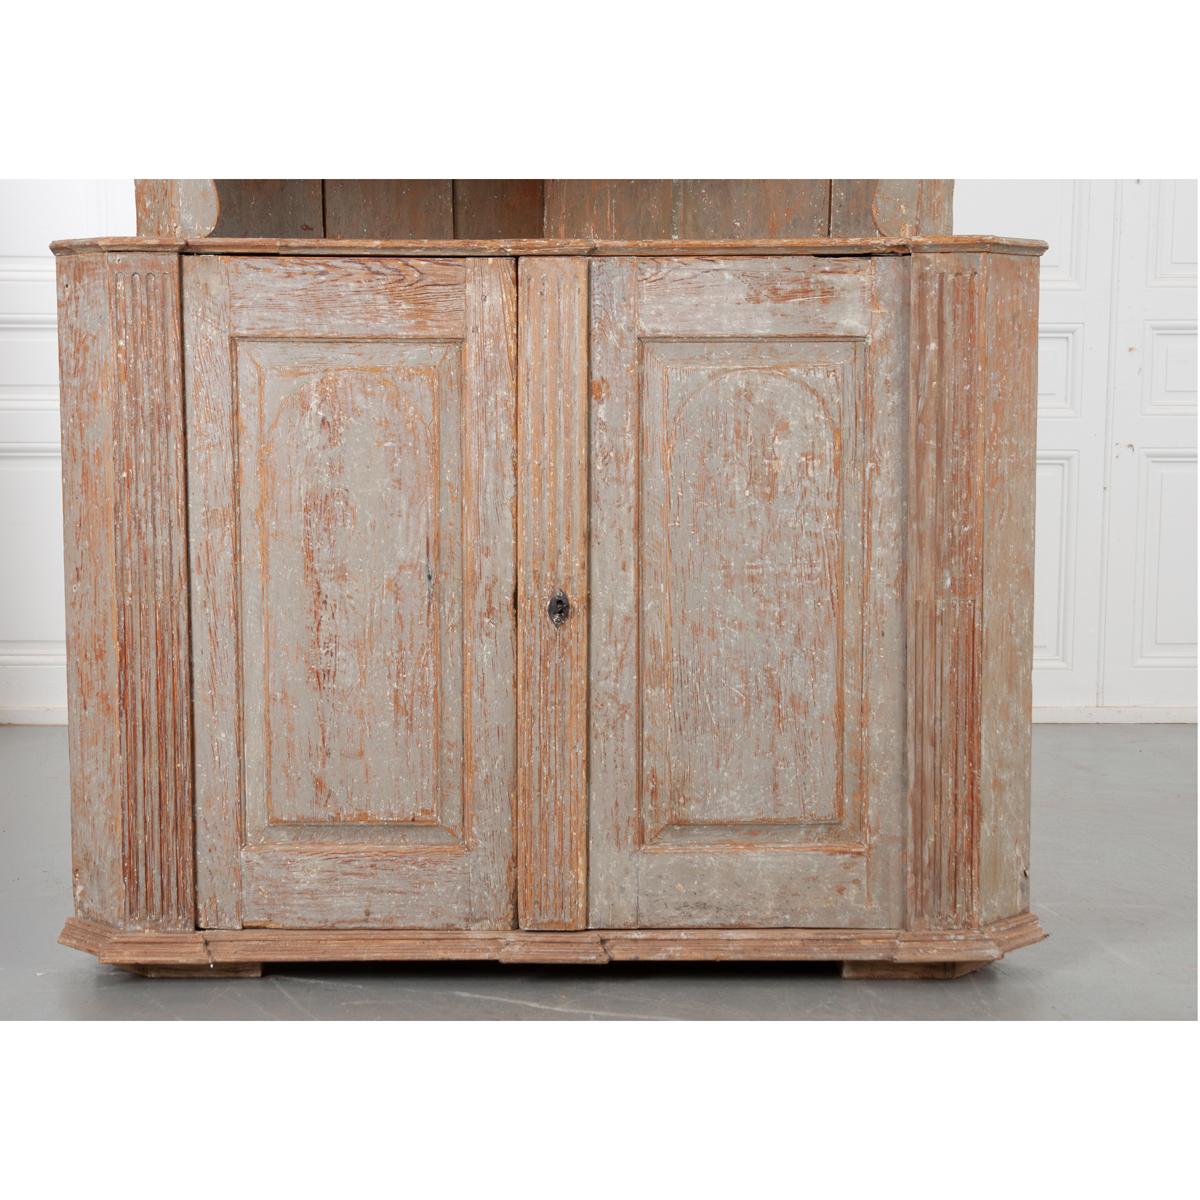 This handsome corner cabinet from 19th century Sweden is constructed with a characteristic neoclassical shape. The worn light blue paint is original to the piece and gives it a wonderful patina. A nicely carved cornice tops the whole, with